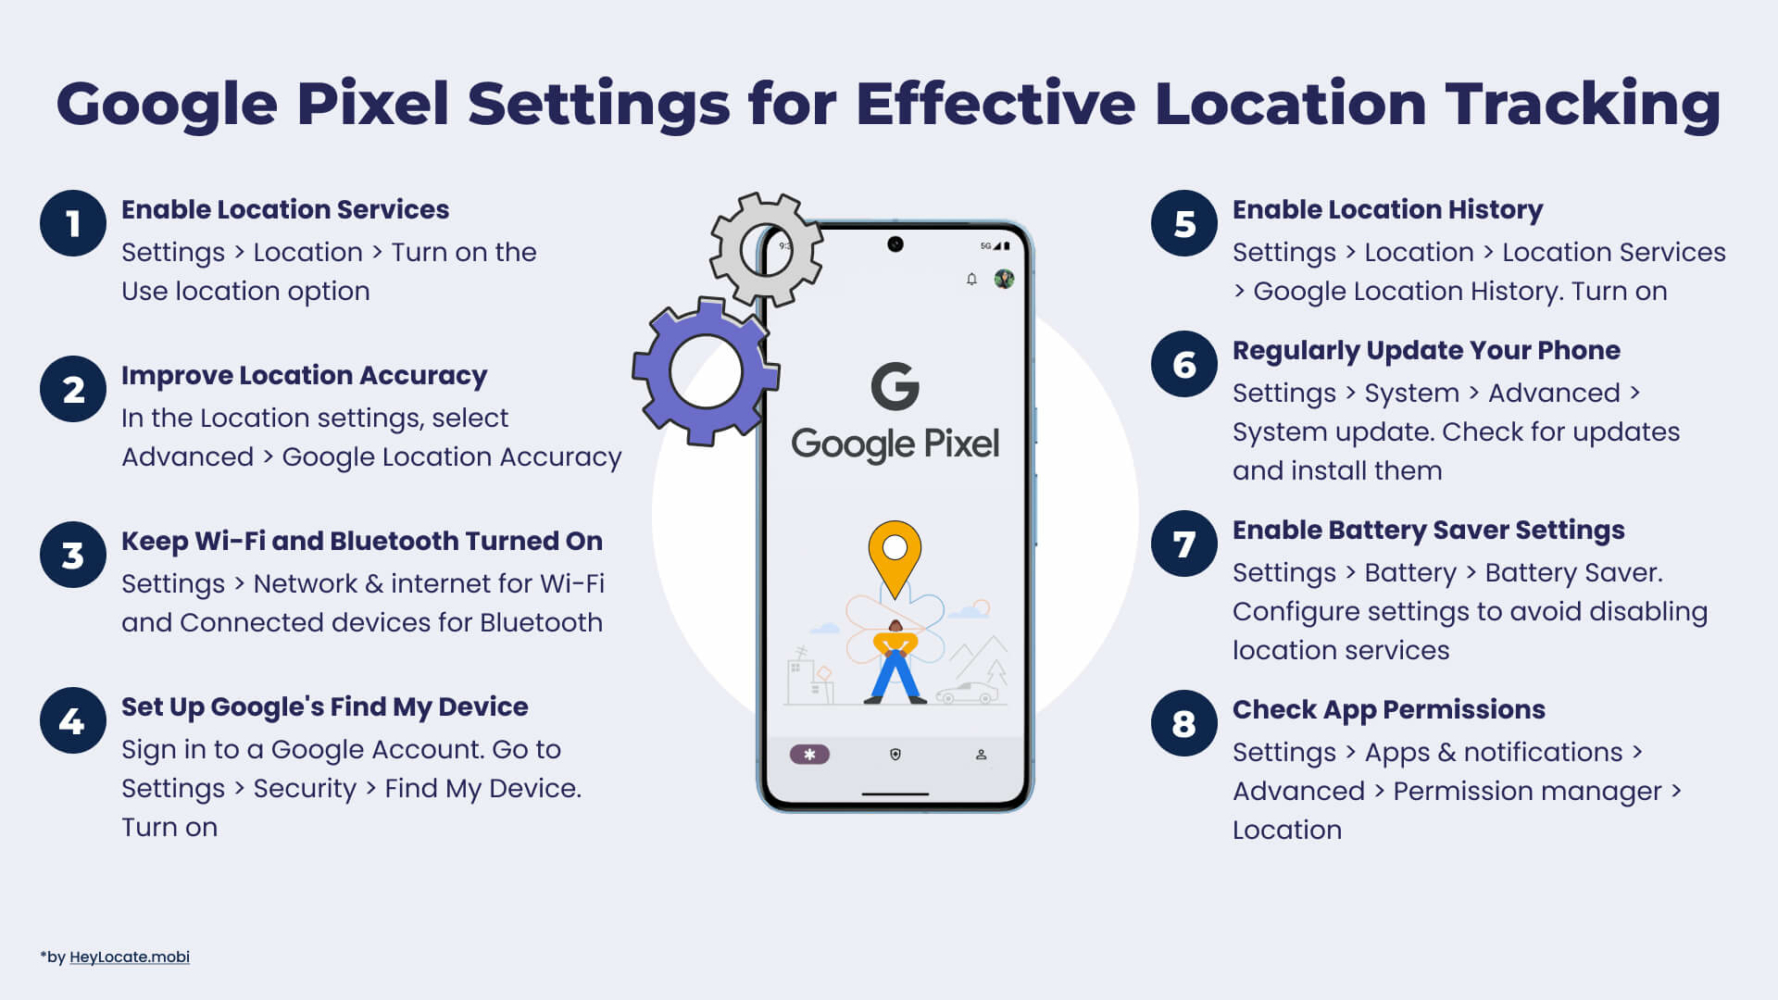 Infographic by HeyLocate.mobi displaying Google Pixel Settings for Effective Location Tracking. It includes eight numbered tips with icons and brief instructions.